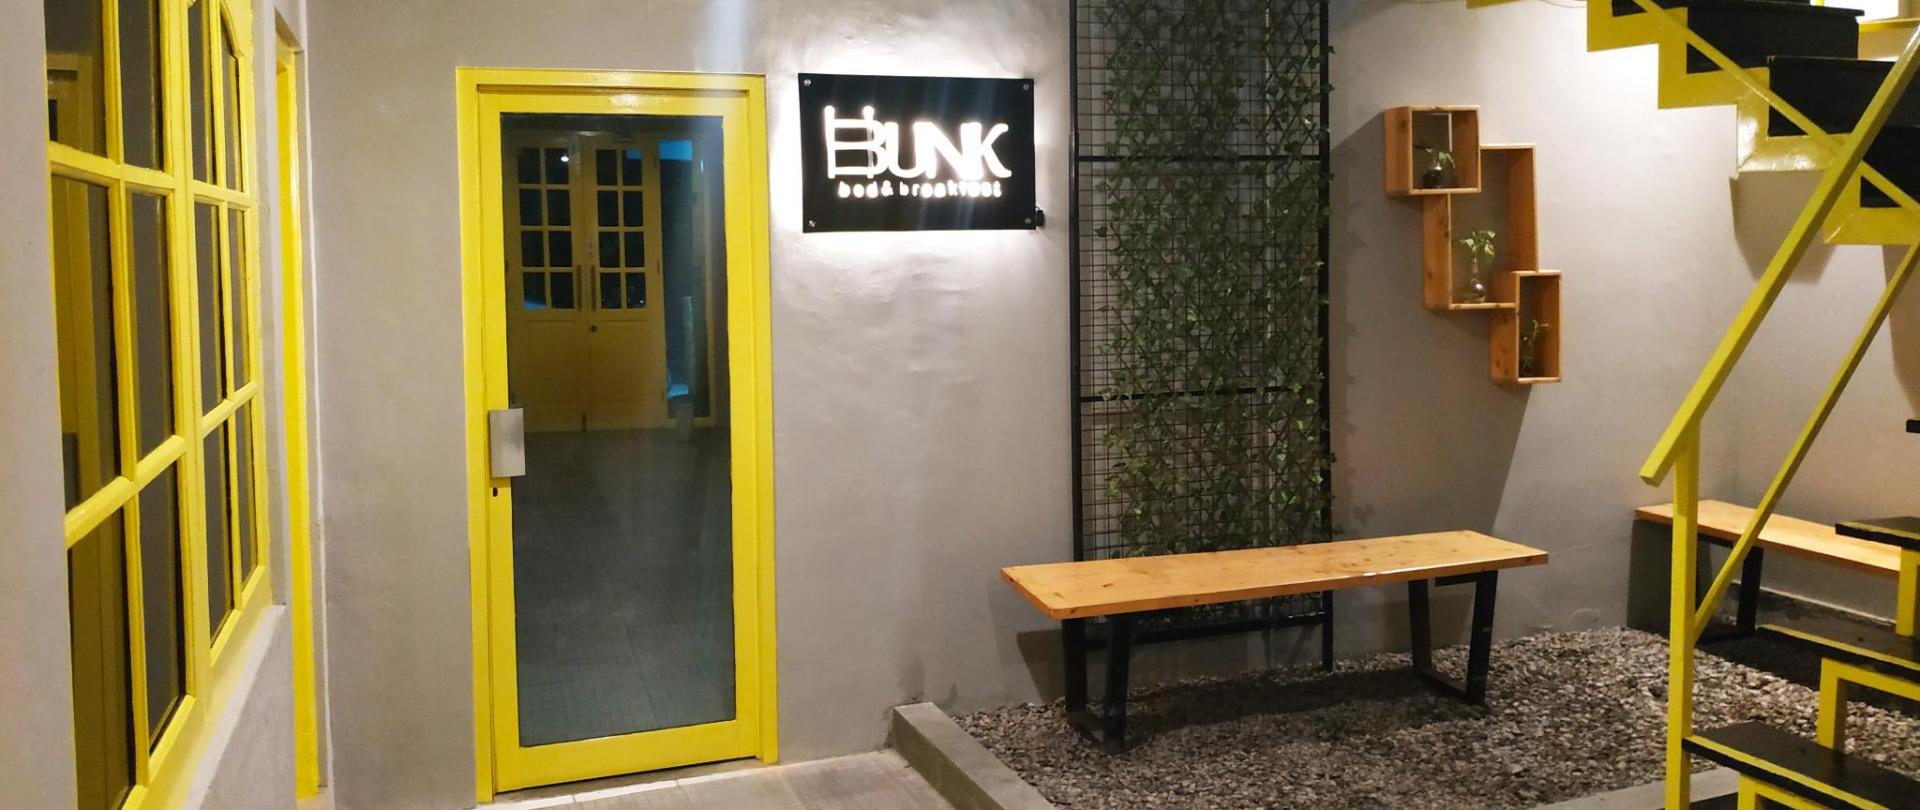 Bunk Bed And Breakfast Official Site Hostels In Yogyakarta